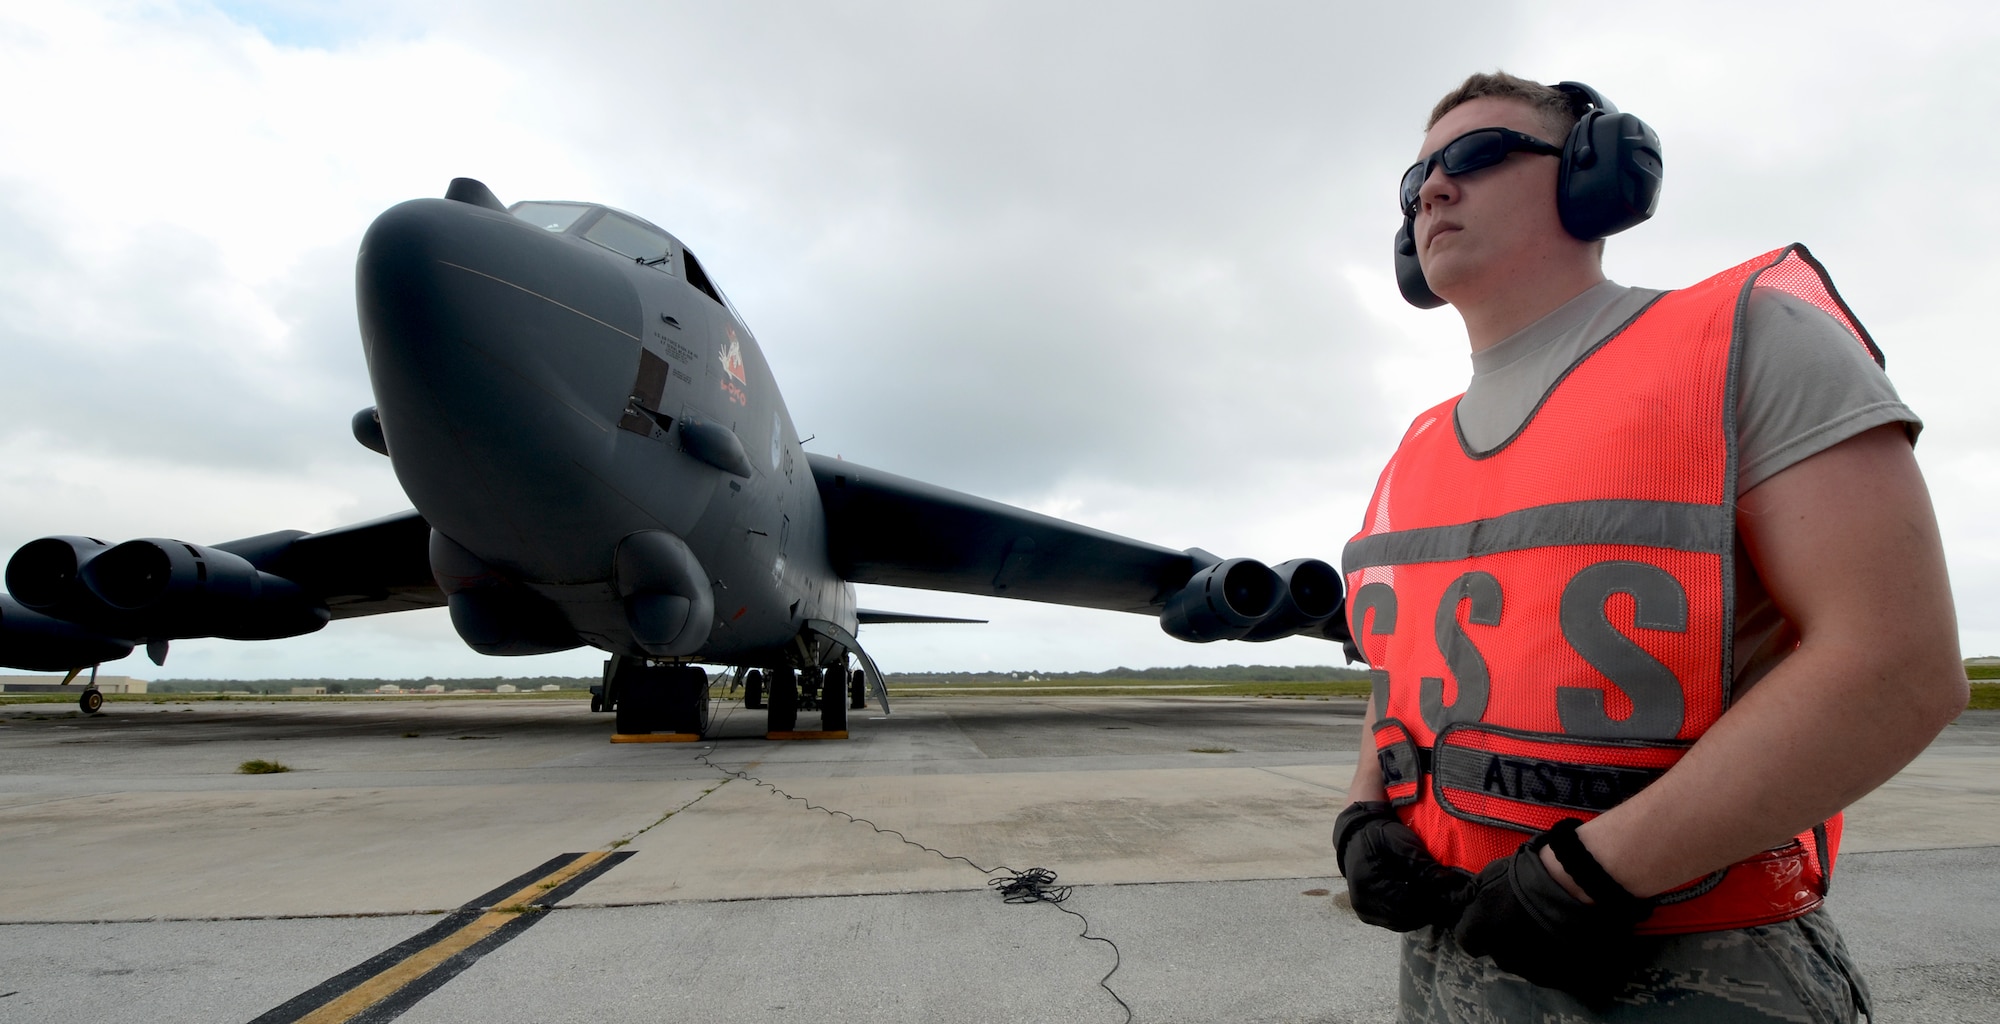 Airman 1st Class Kevin Carmel, 36th Expeditionary Aircraft Maintenance Squadron crew chief, deployed from Minot Air Force Base, N.D., prepares a B-52 Stratofortress for takeoff at Andersen Air Force Base, Guam, April 2, 2013. A new rotation of aircrews, maintenance personnel and aircraft arrived to Guam March 31 to replace the 96th Expeditionary Bomb Squadron in support of U.S. Pacific Command’s continuous bomber presence mission. (U.S. Air Force photo by Senior Airman Benjamin Wiseman/Released)